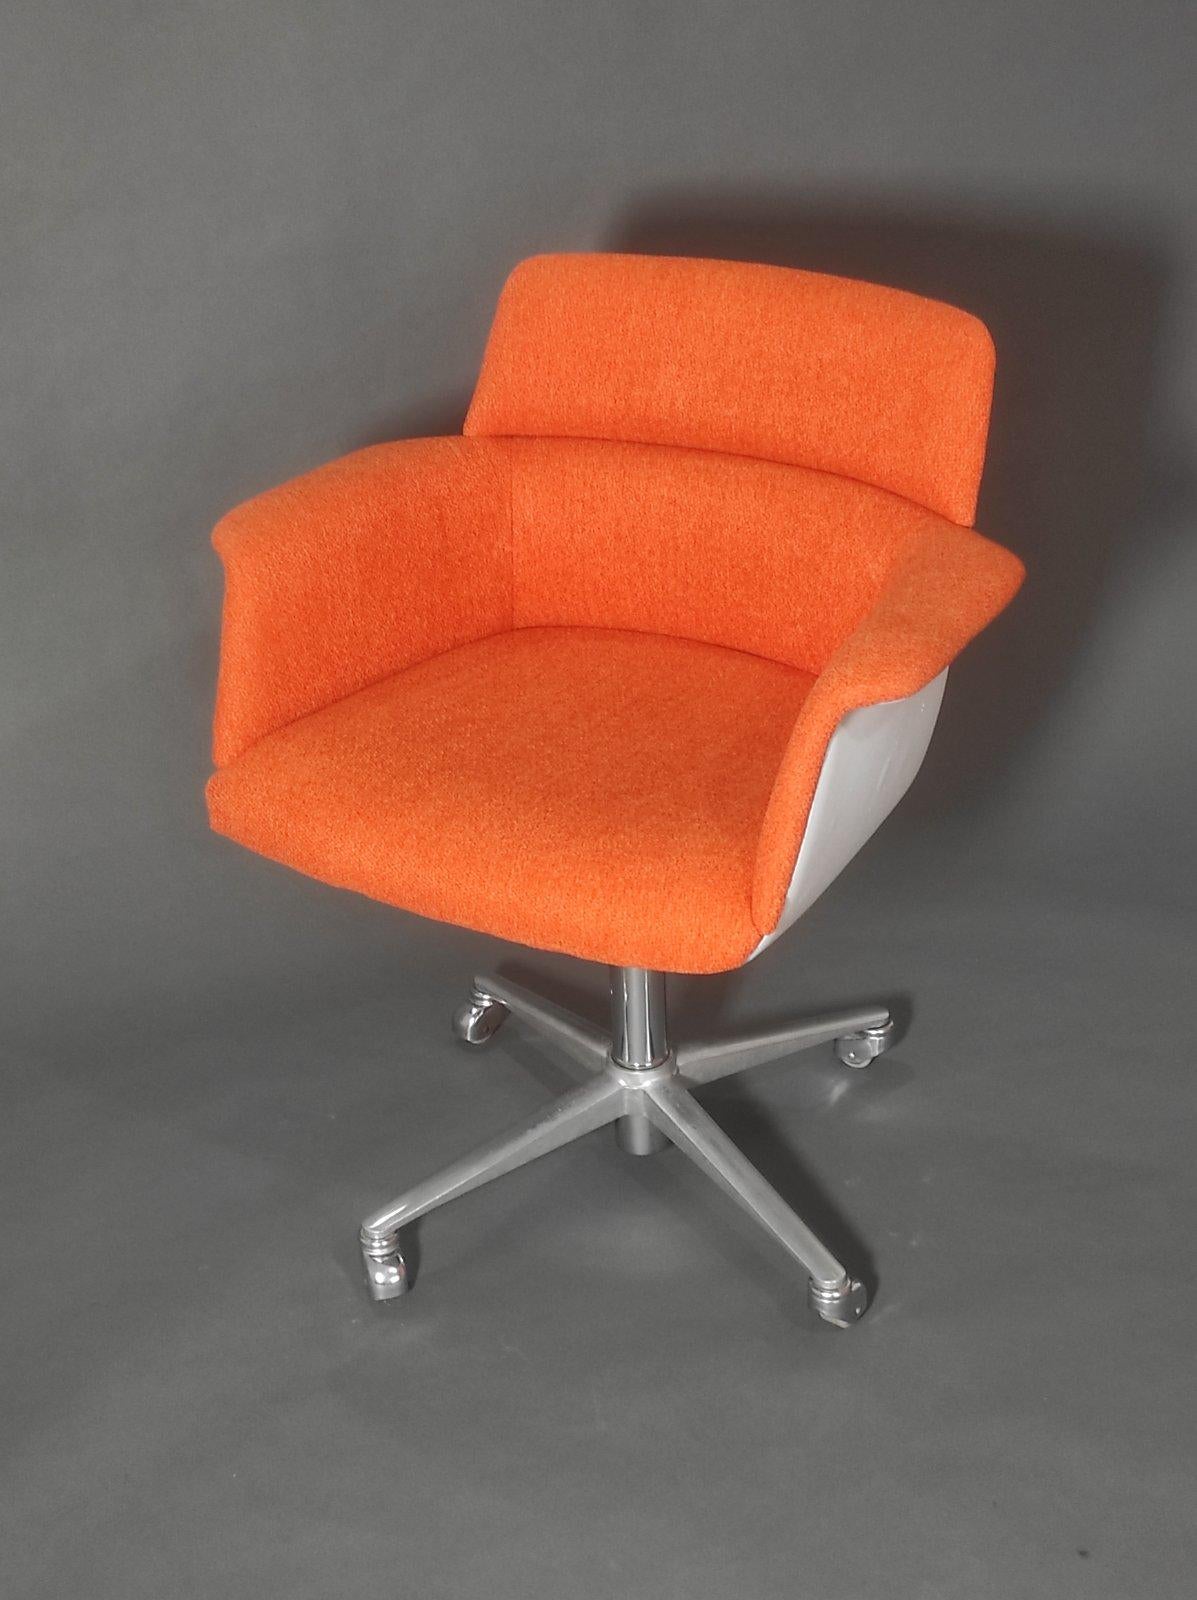 Model 250 Space Age Ofice Chair By Georg Leowald for Vilkhahn 1960s For Sale 2